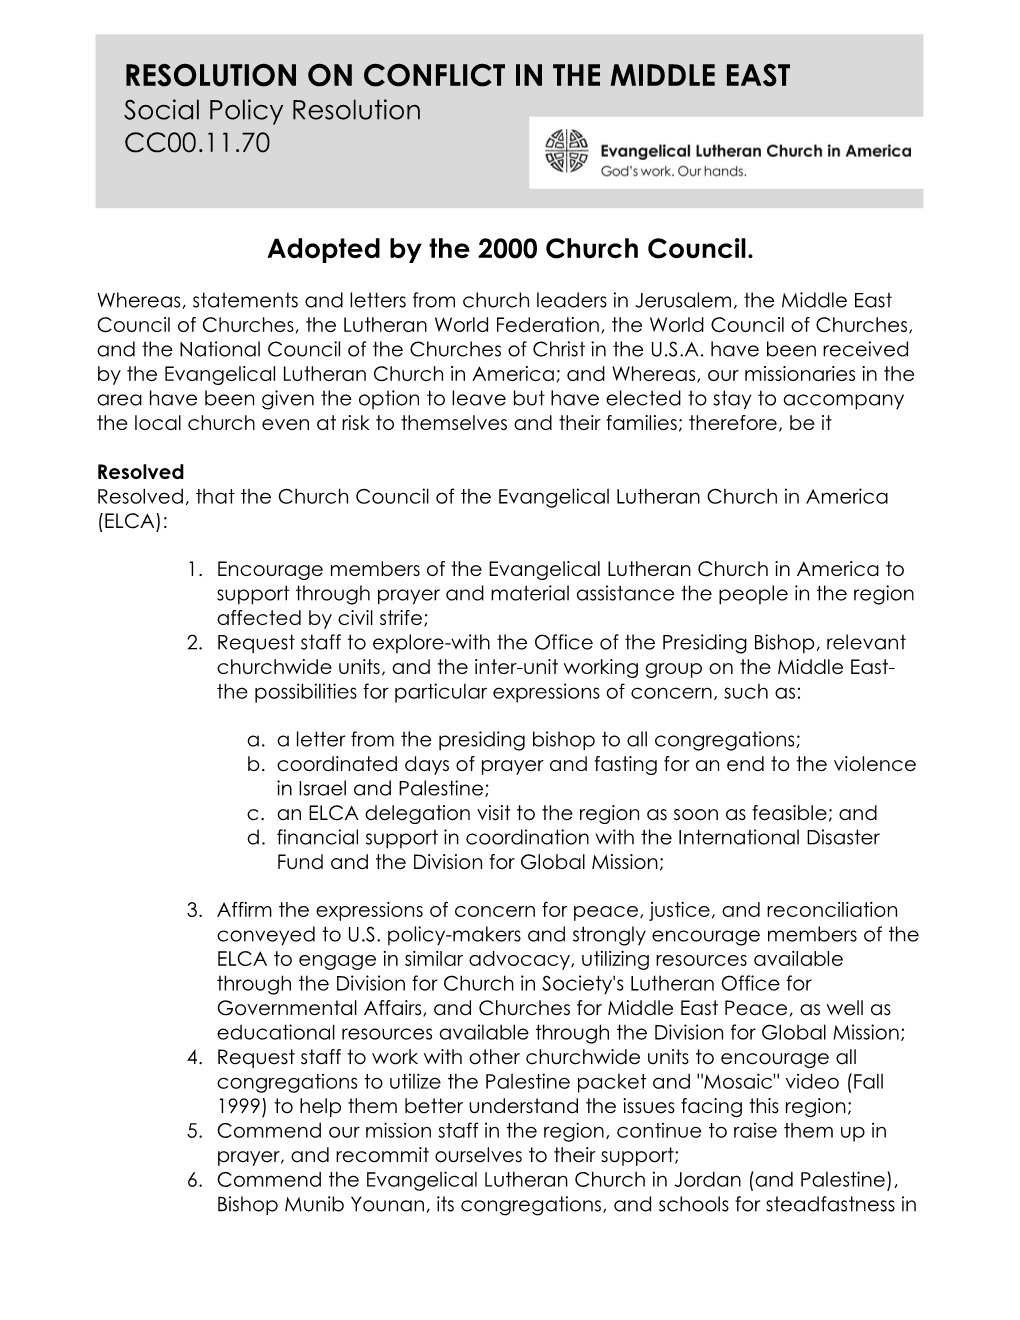 RESOLUTION on CONFLICT in the MIDDLE EAST Social Policy Resolution CC00.11.70